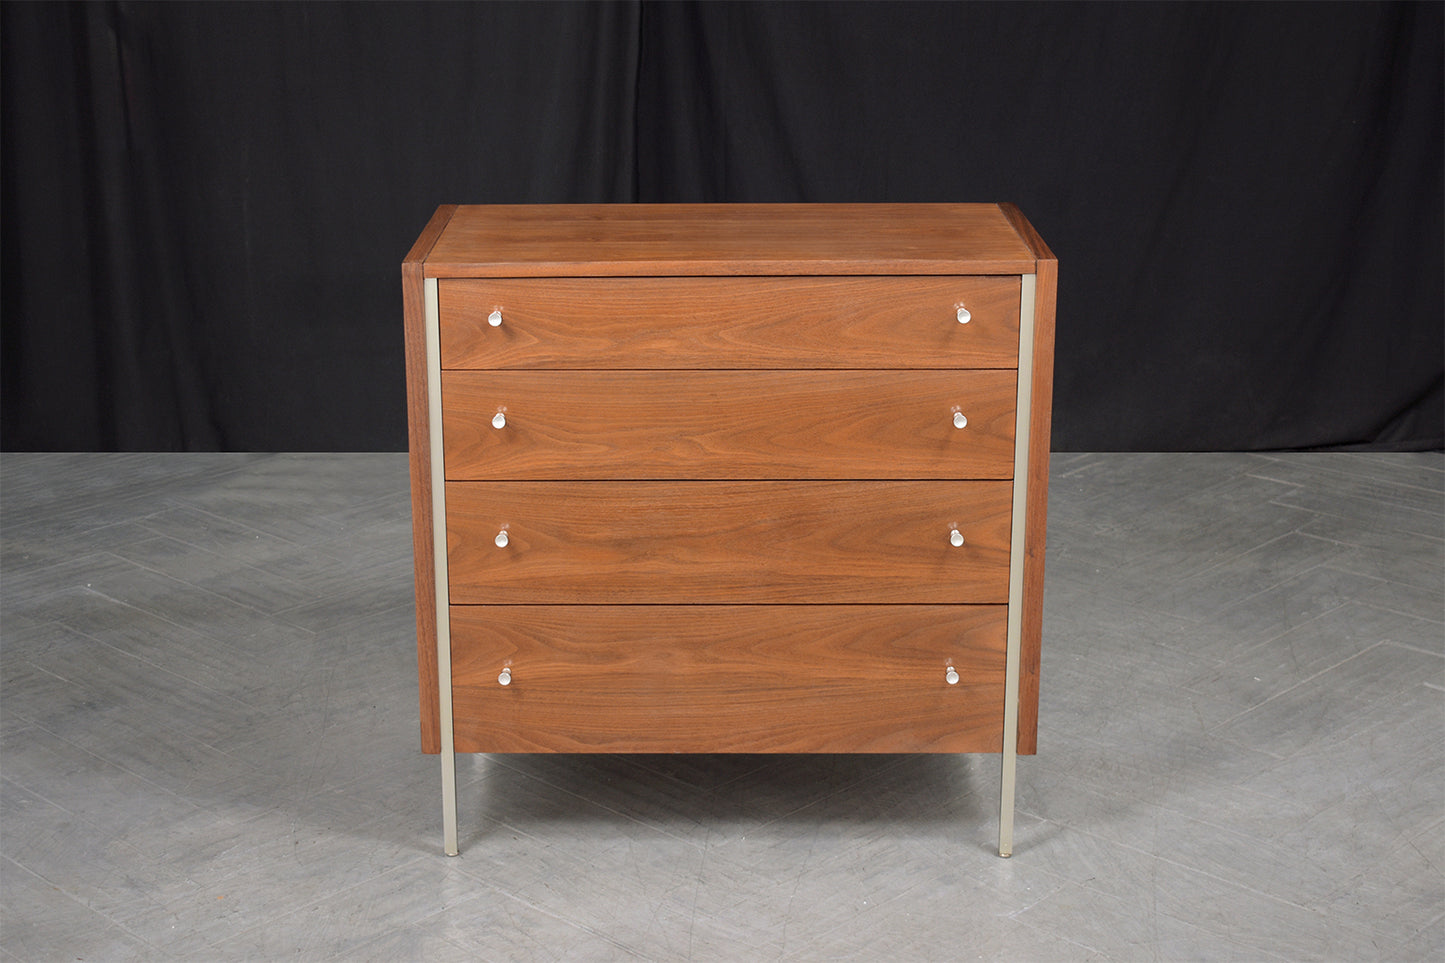 Handcrafted Mid-Century Modern Walnut Chest of Drawers